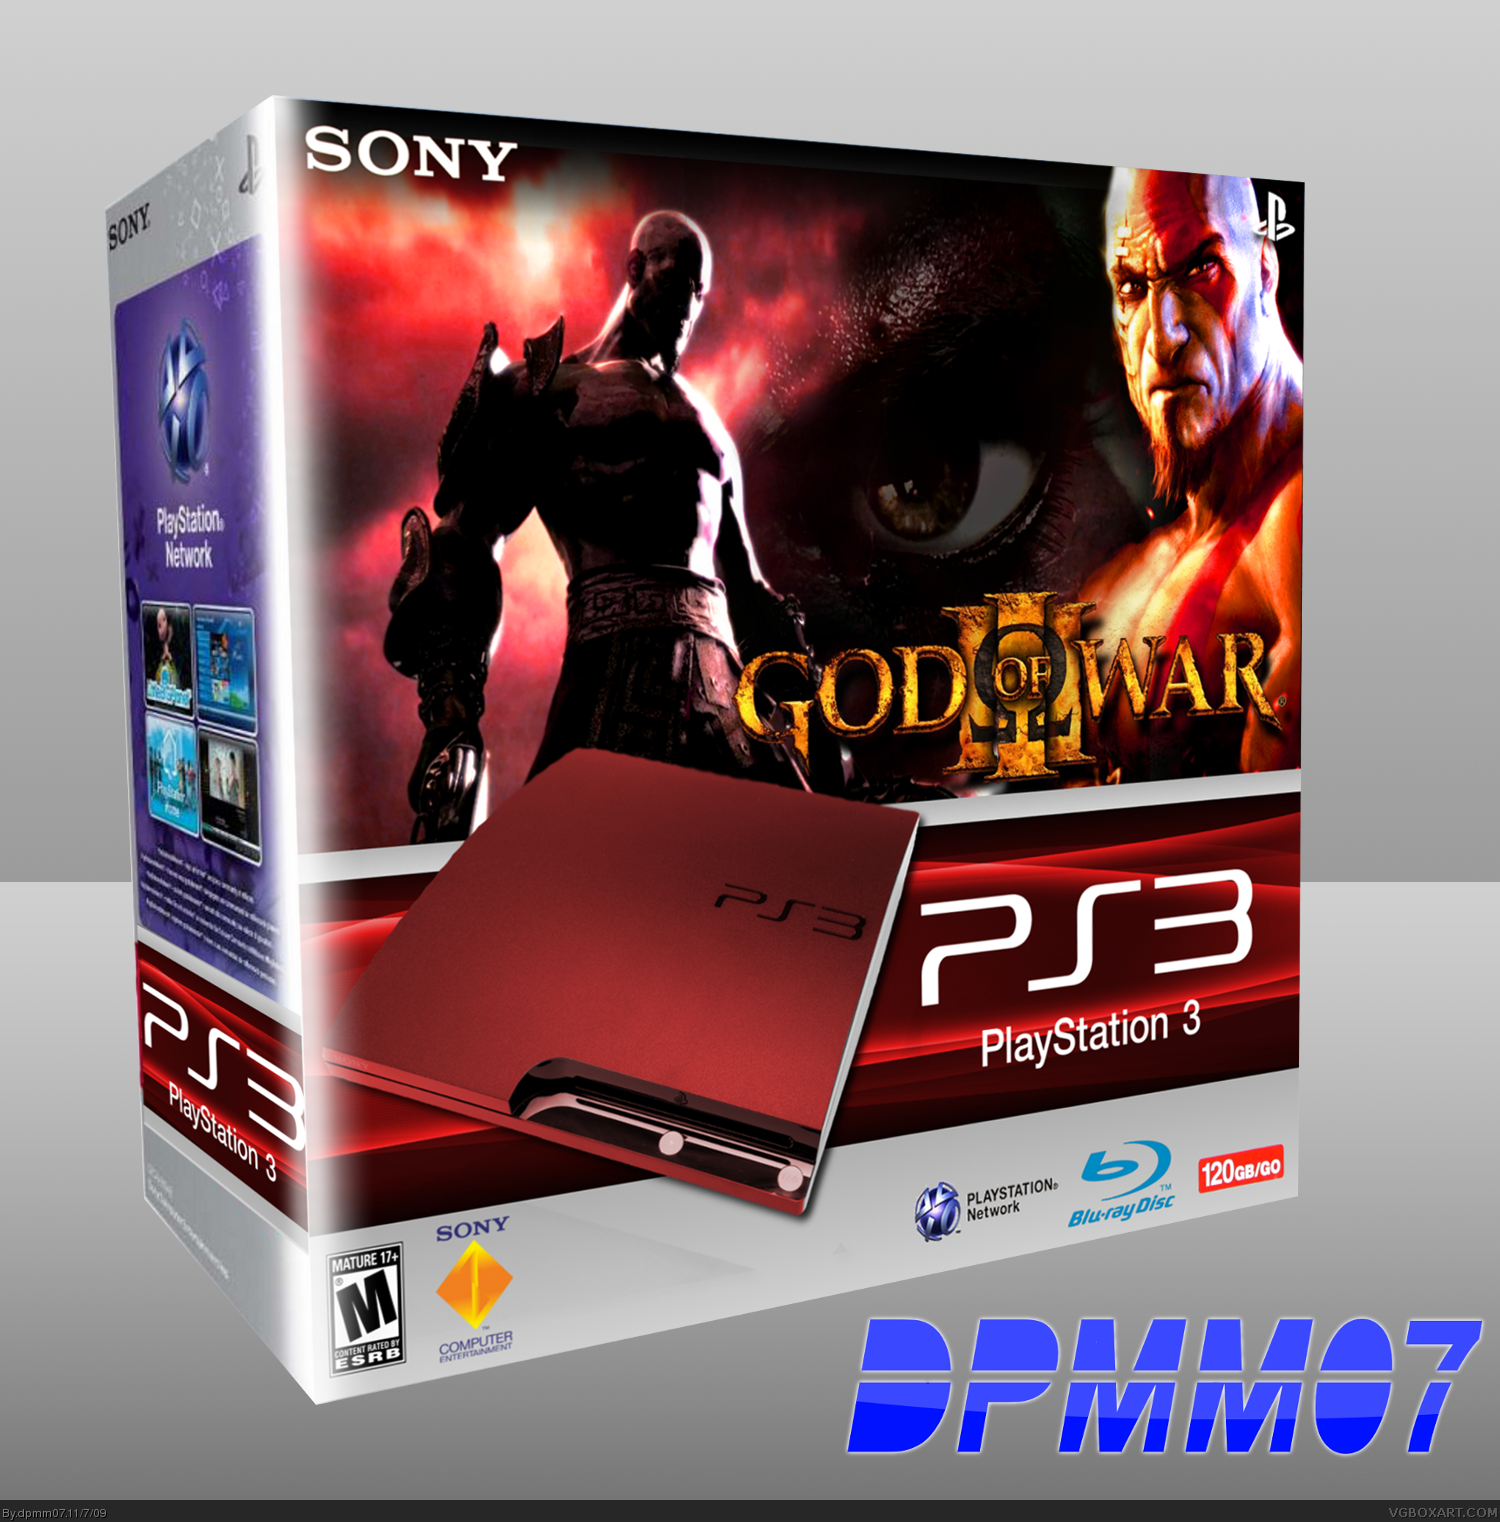 God Of War III (Limited Edition Red PS3 Bundle) box cover